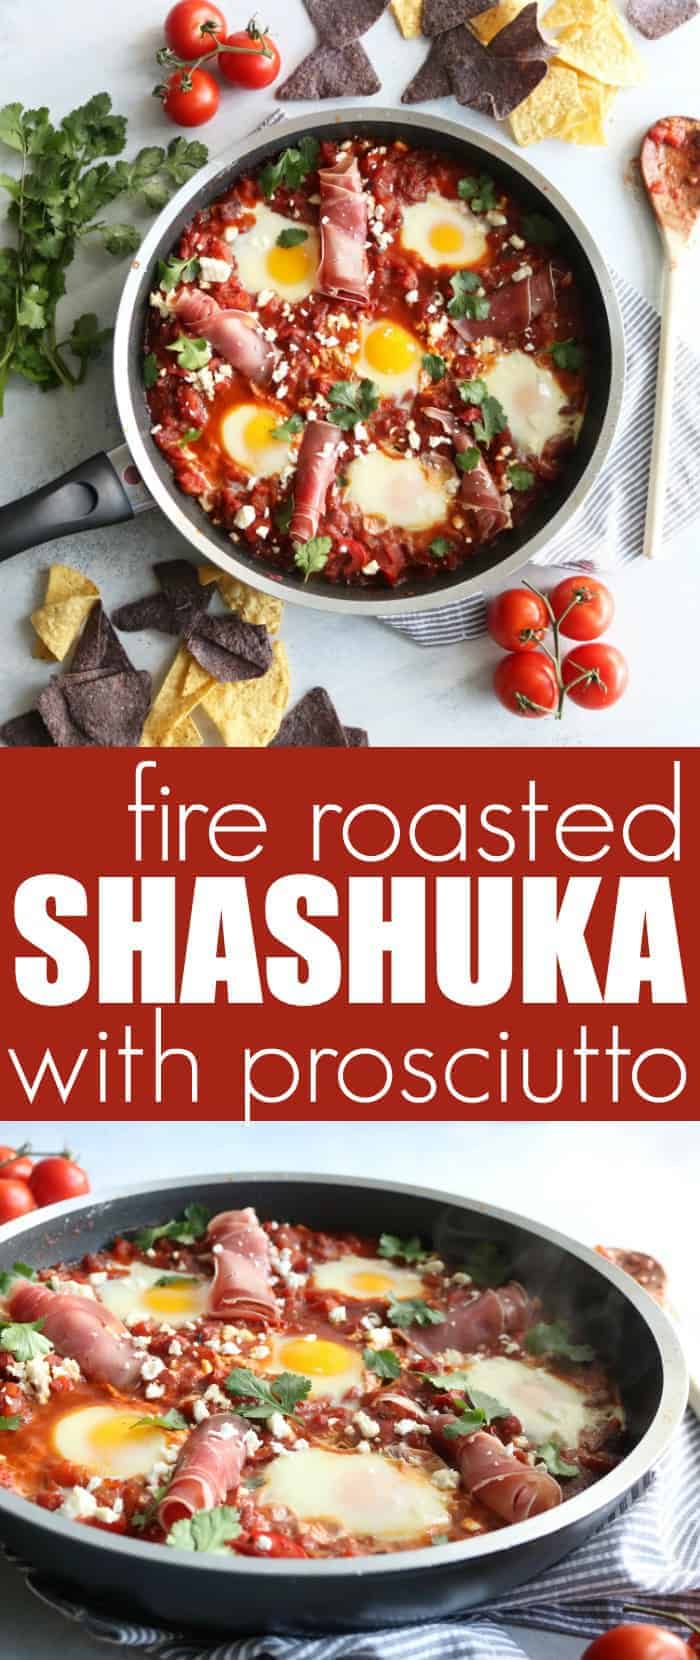 Love this family-style fire roasted shashuka with prosciutto and feta! It's such and easy and delicious recipe great for the whole family! thetoastedpinenut.com #breakfast #brunch #shashuka #glutenfree